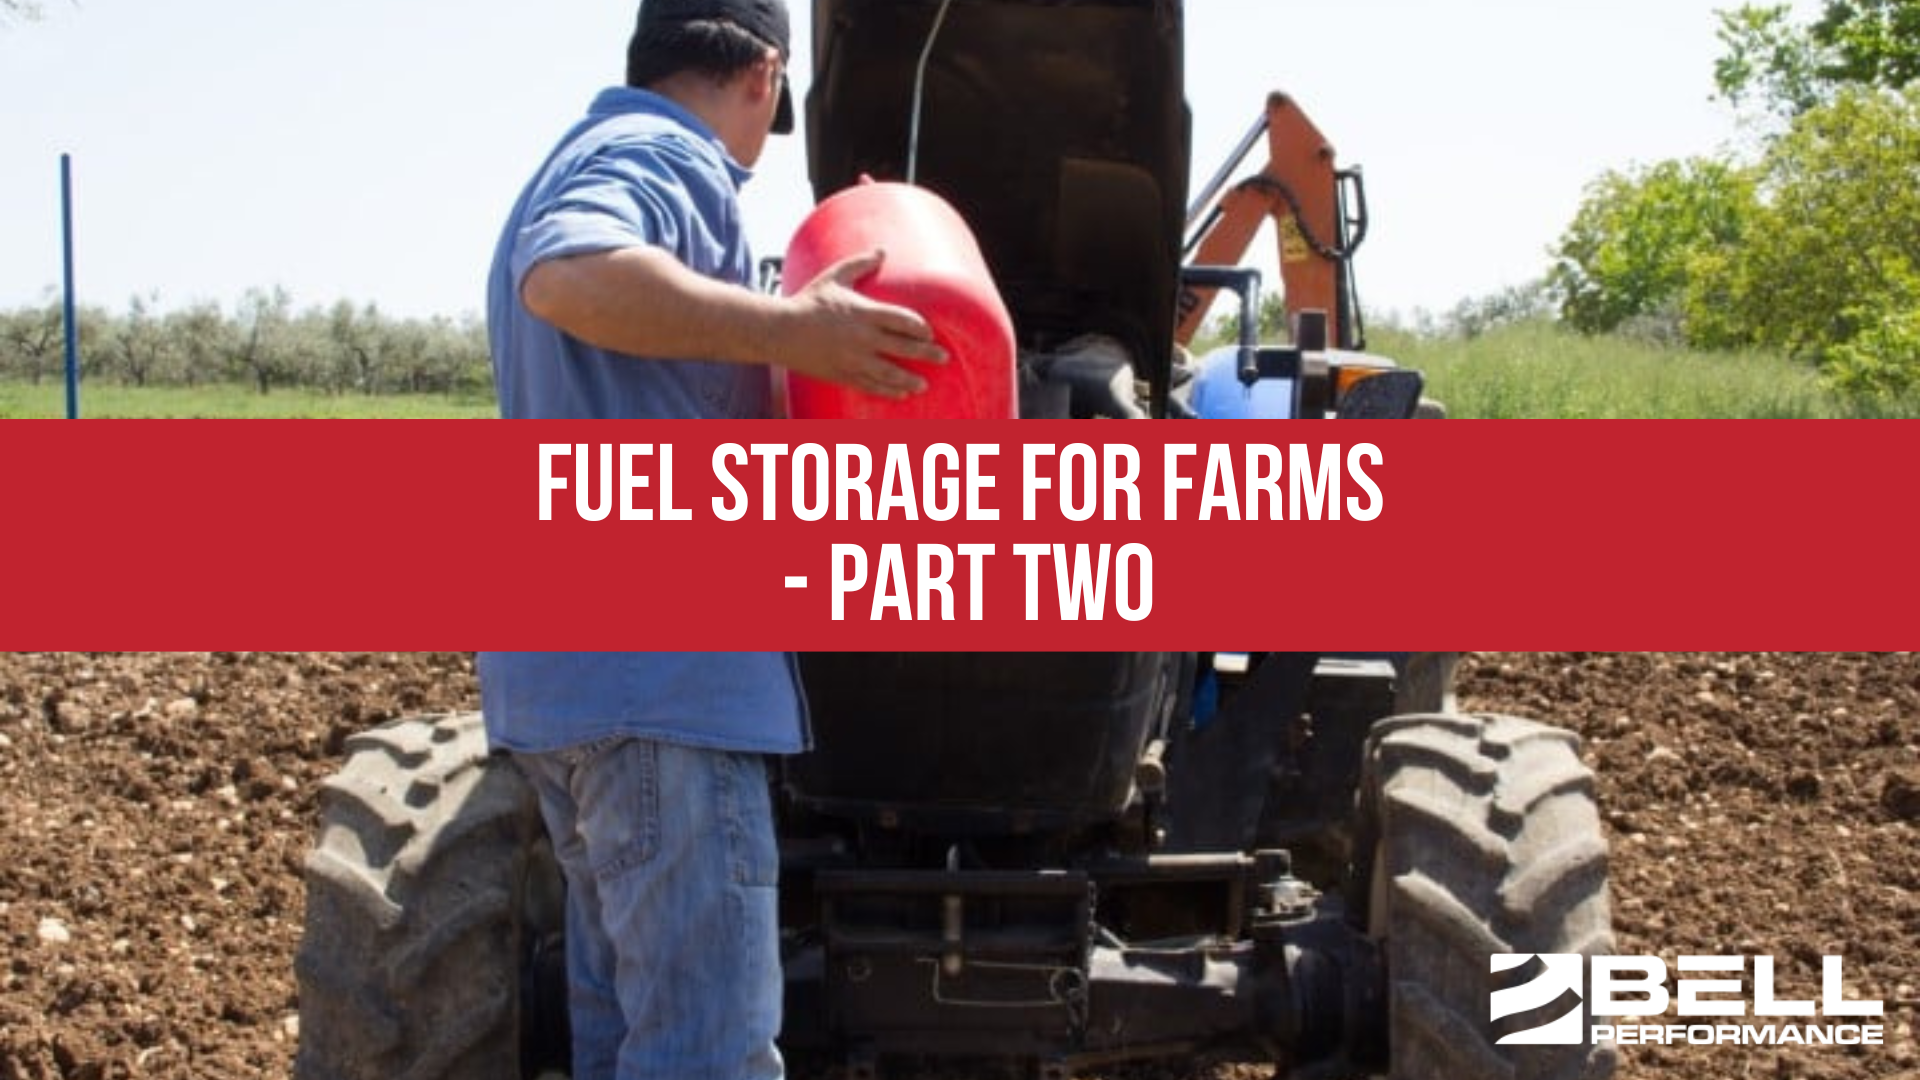 Fuel Storage for Farms - Part Two